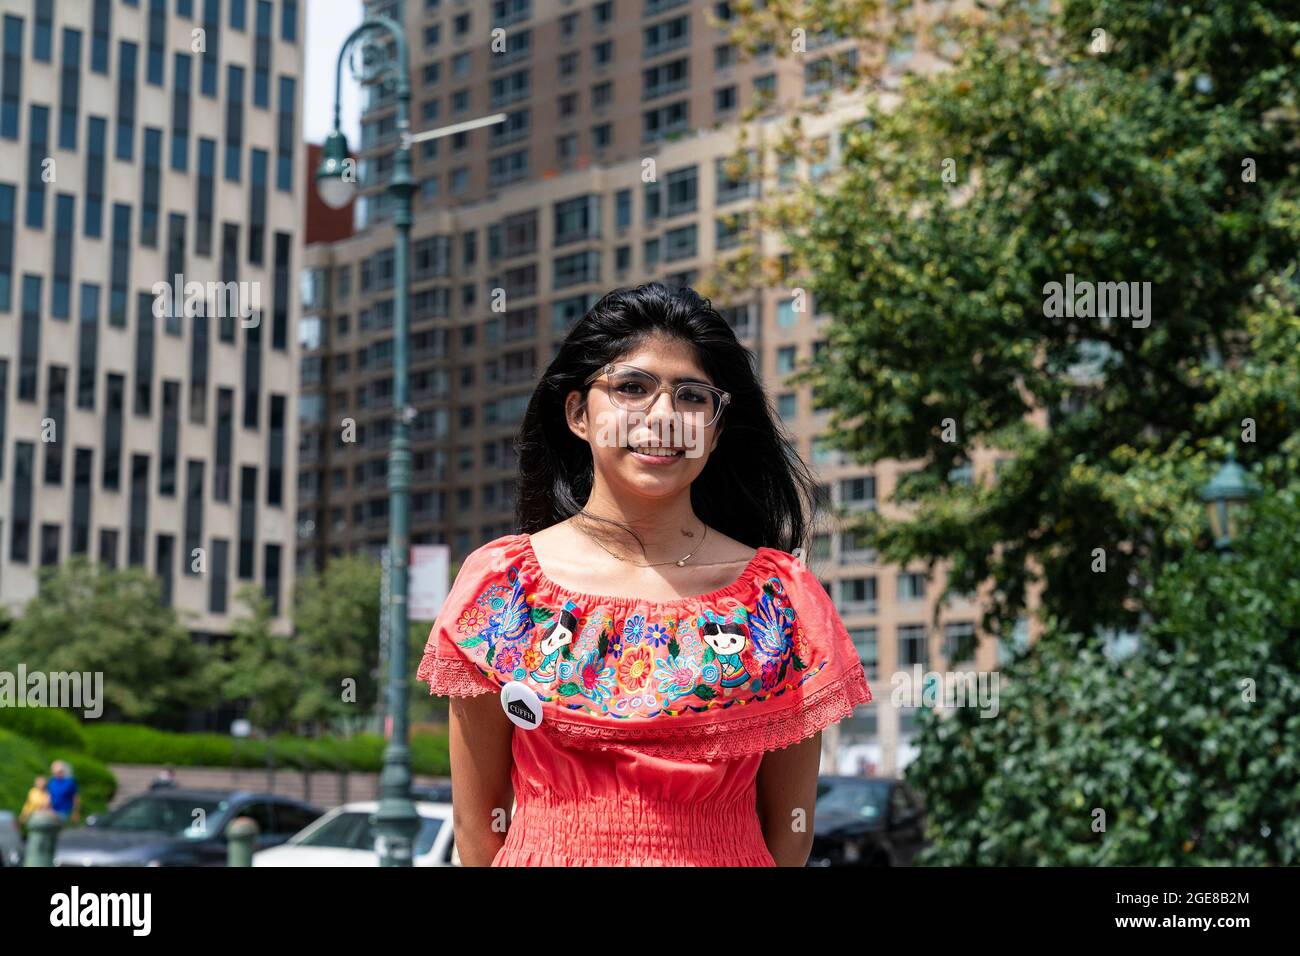 https://c8.alamy.com/comp/2GE8B2M/nicole-melara-of-churches-united-for-fair-housing-wearing-traditional-mexican-dress-joined-few-dozens-of-daca-recipients-rally-on-foley-square-in-new-york-on-august-17-2021-demanding-citizenship-now-for-all-undocumented-immigrants-photo-by-lev-radinsipa-usa-2GE8B2M.jpg